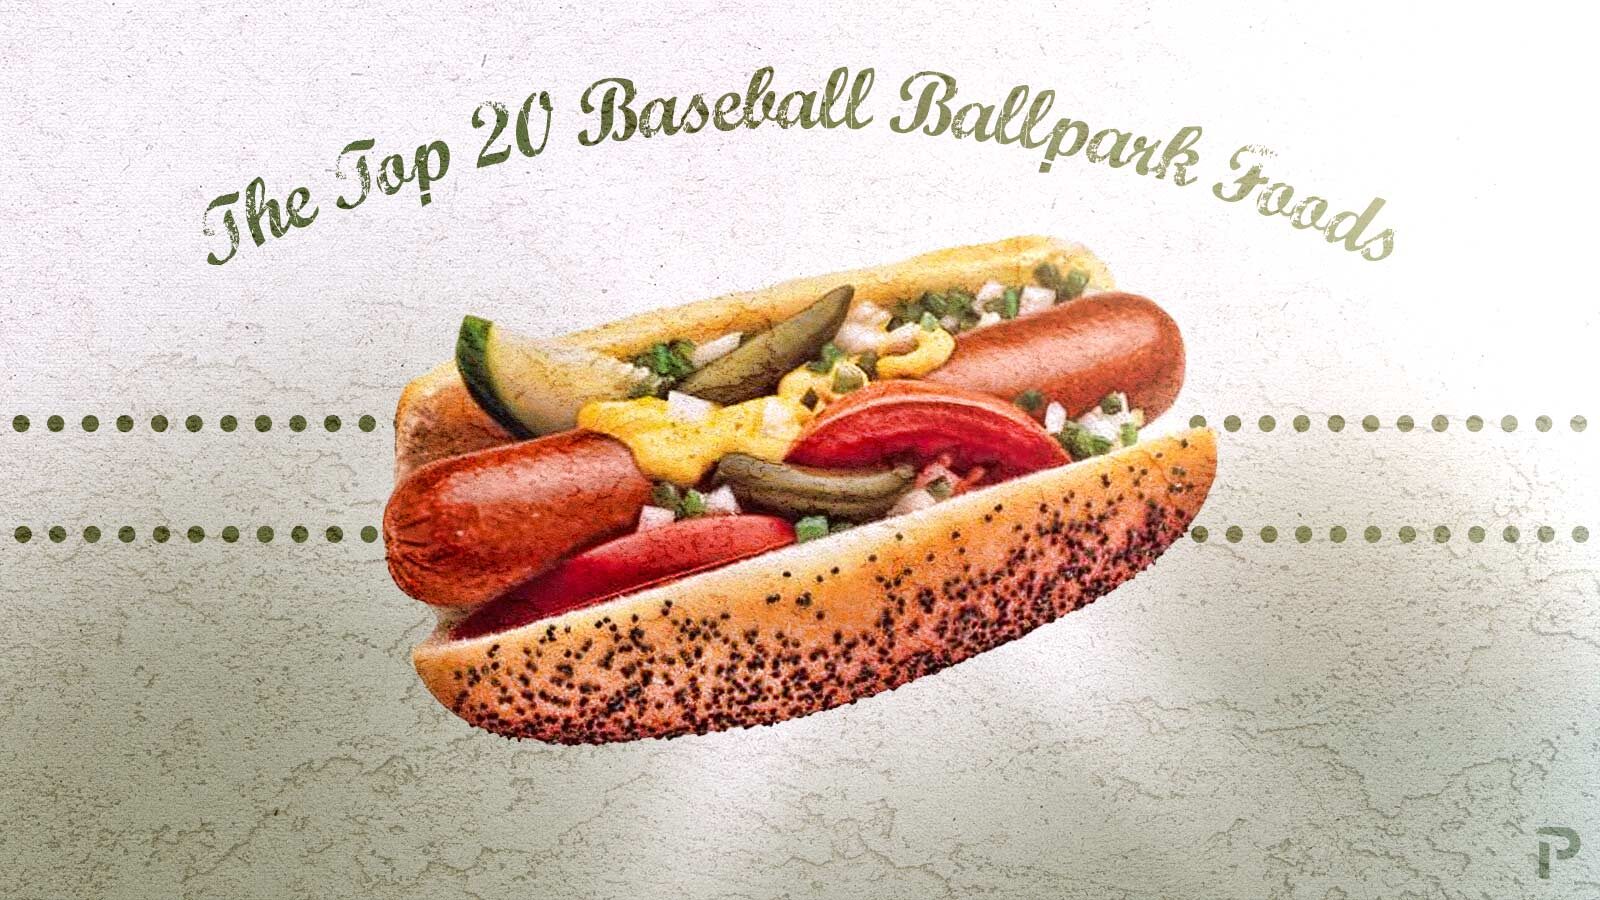 Best Signature Ballpark Food and Hot Dogs - ESPN